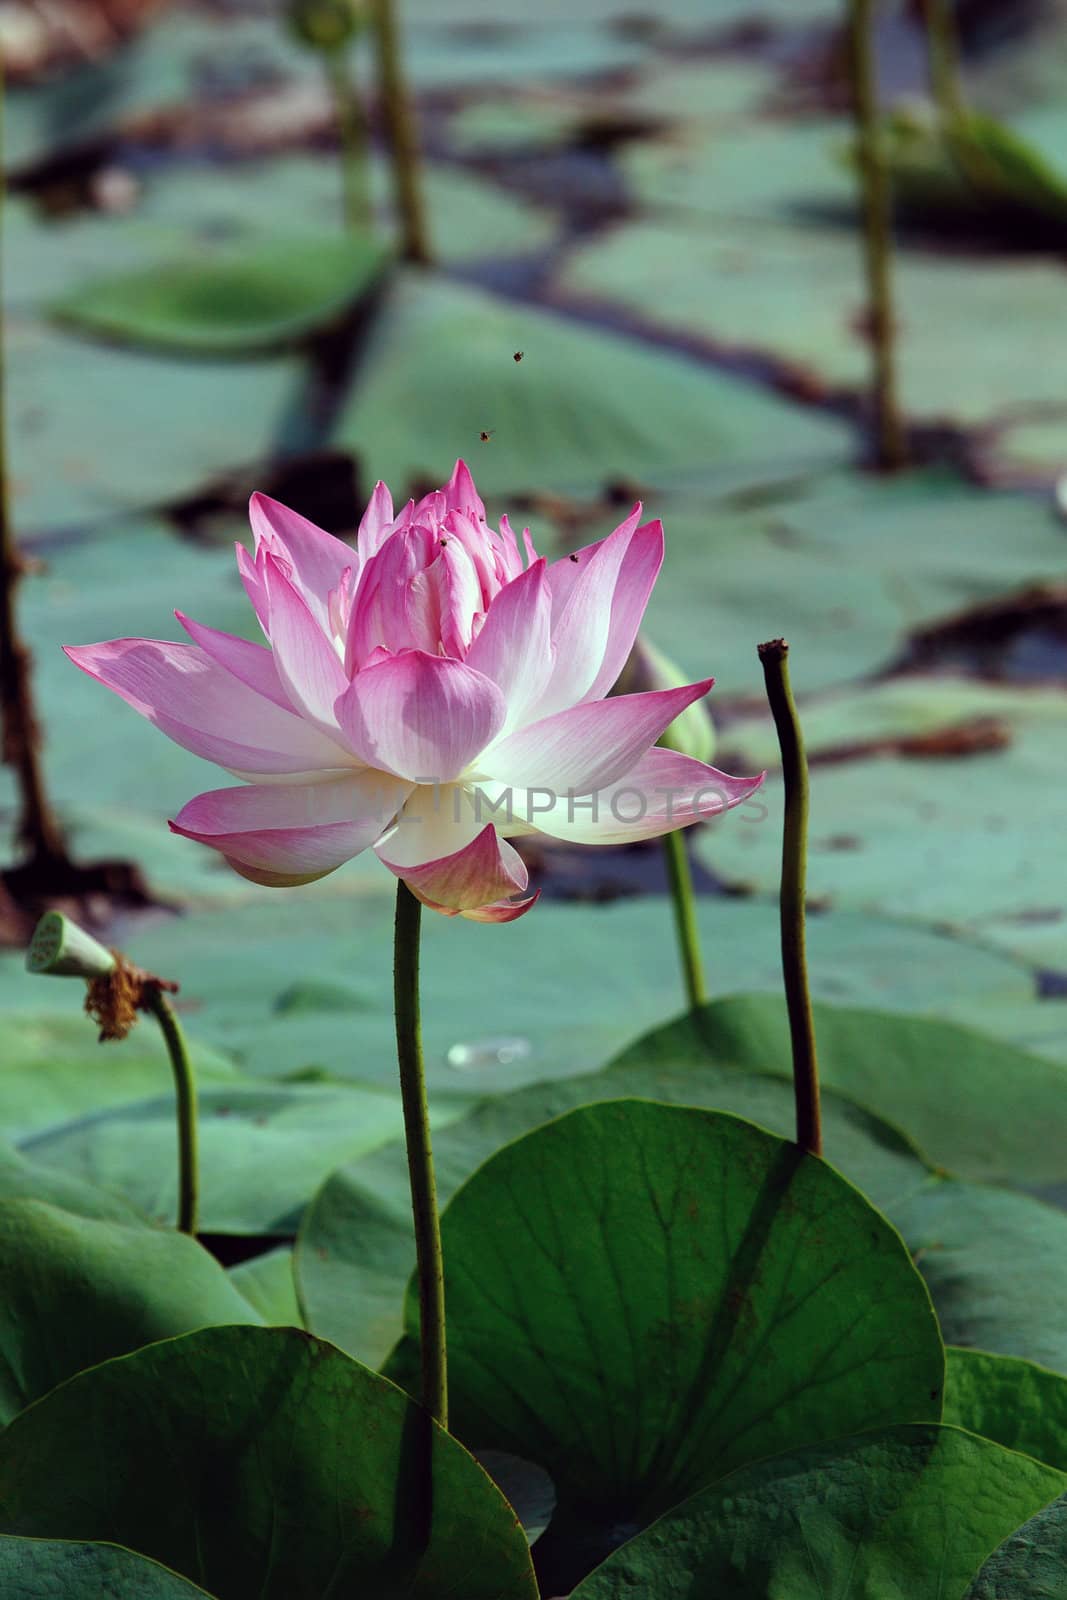 Lotus flower in  full bloom at a local pond